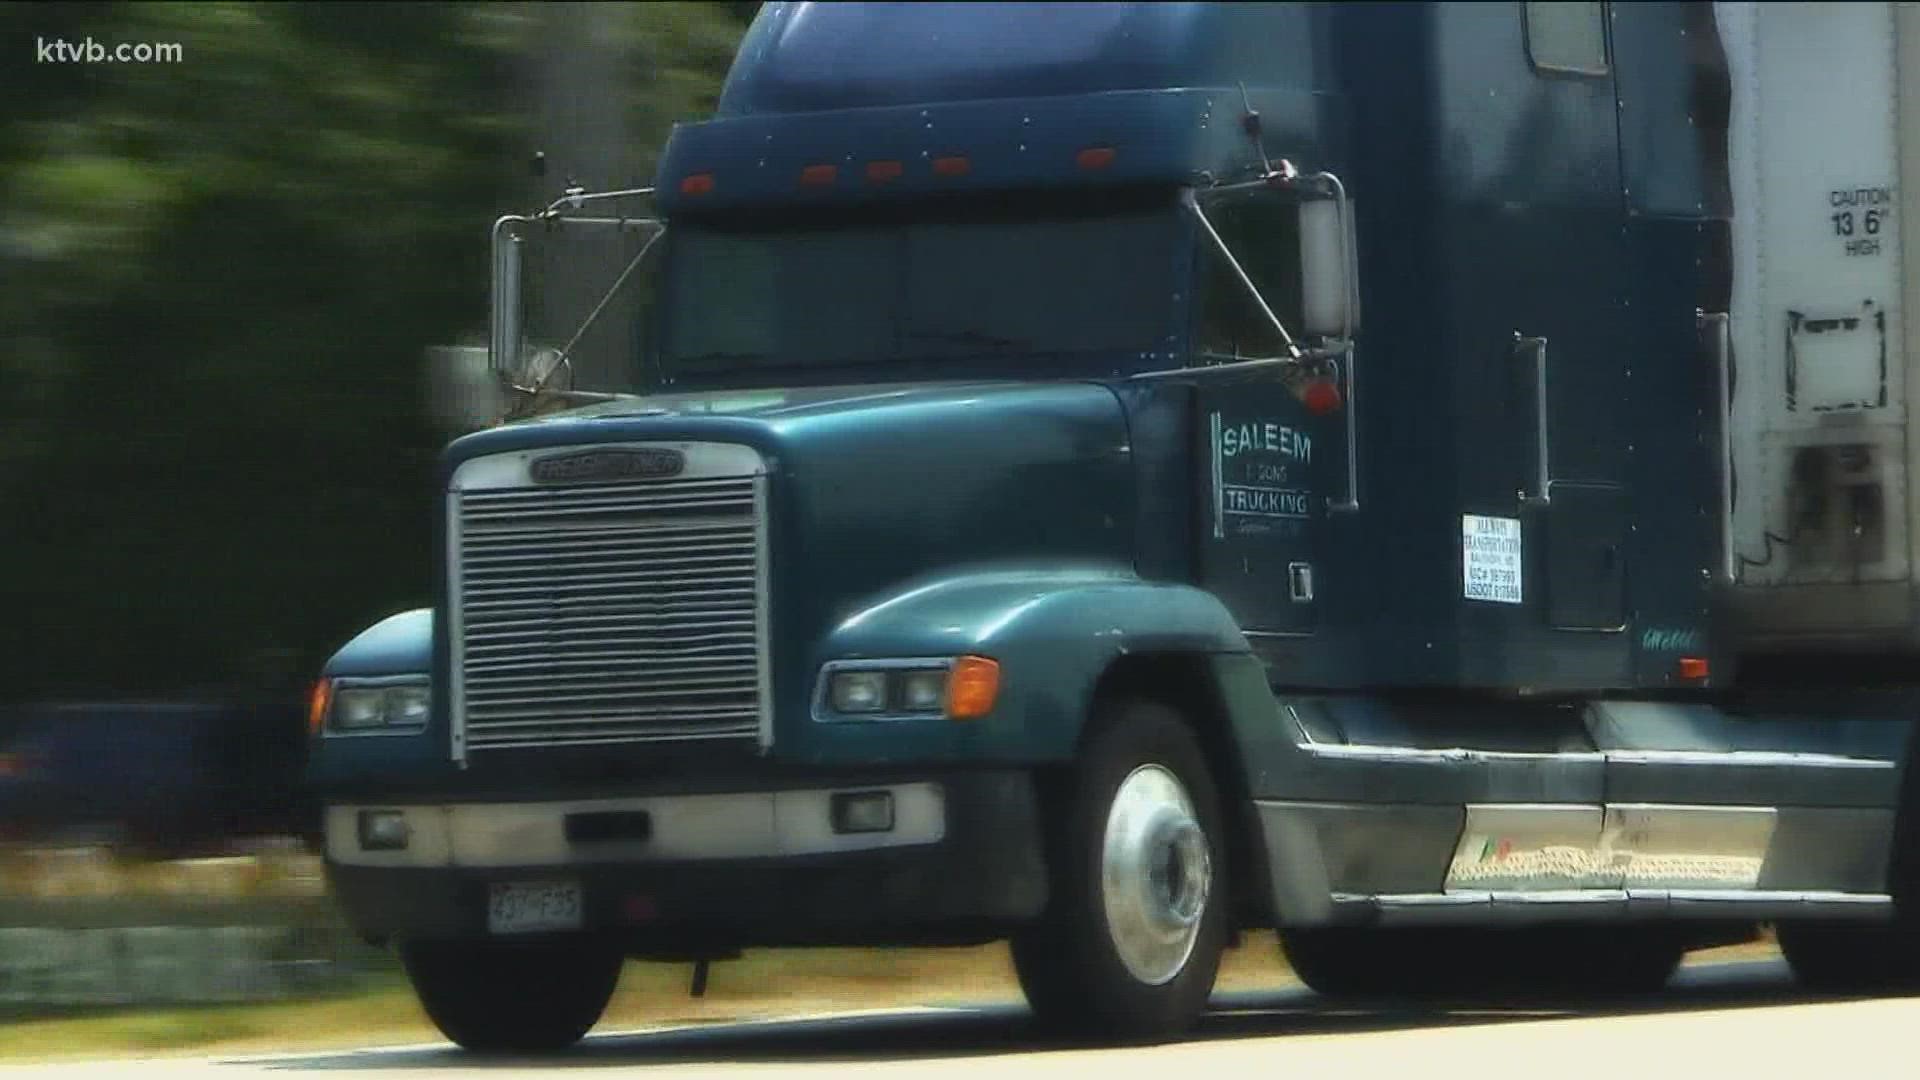 Prospective drivers need to be 21 to drive commercial trucks across state lines. "We're losing those people to other industries," an Idaho trainer said.